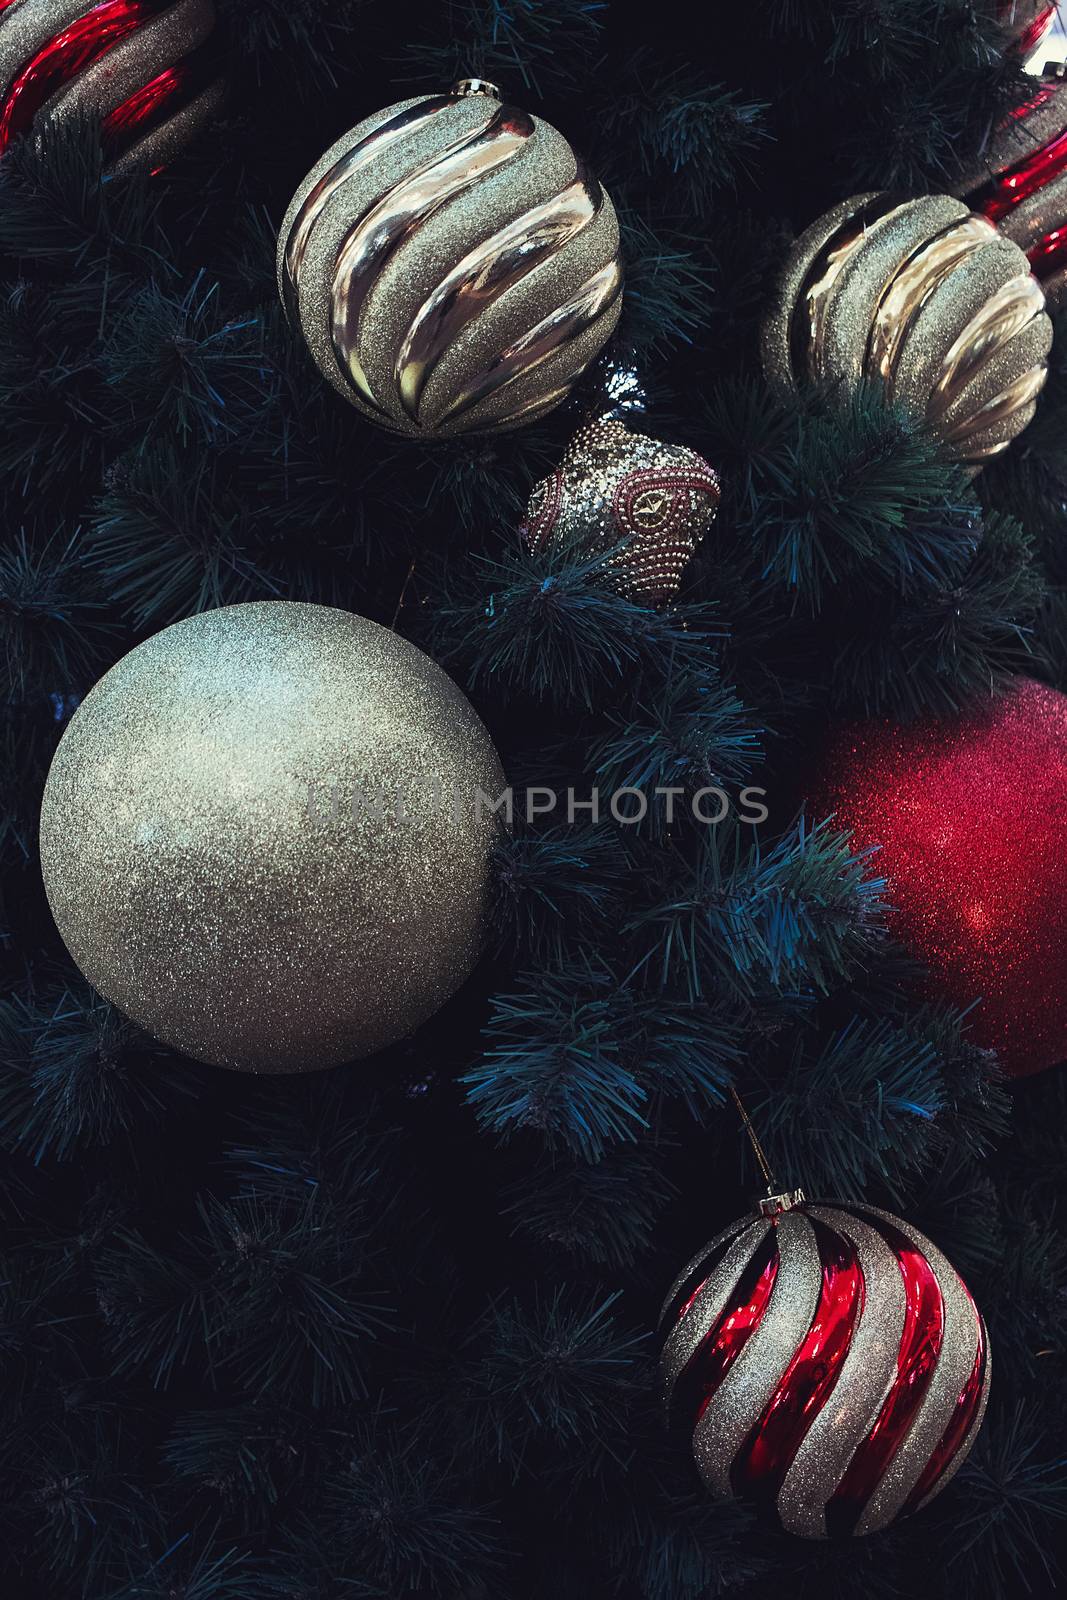 Decorations on the Christmas tree by 3KStudio